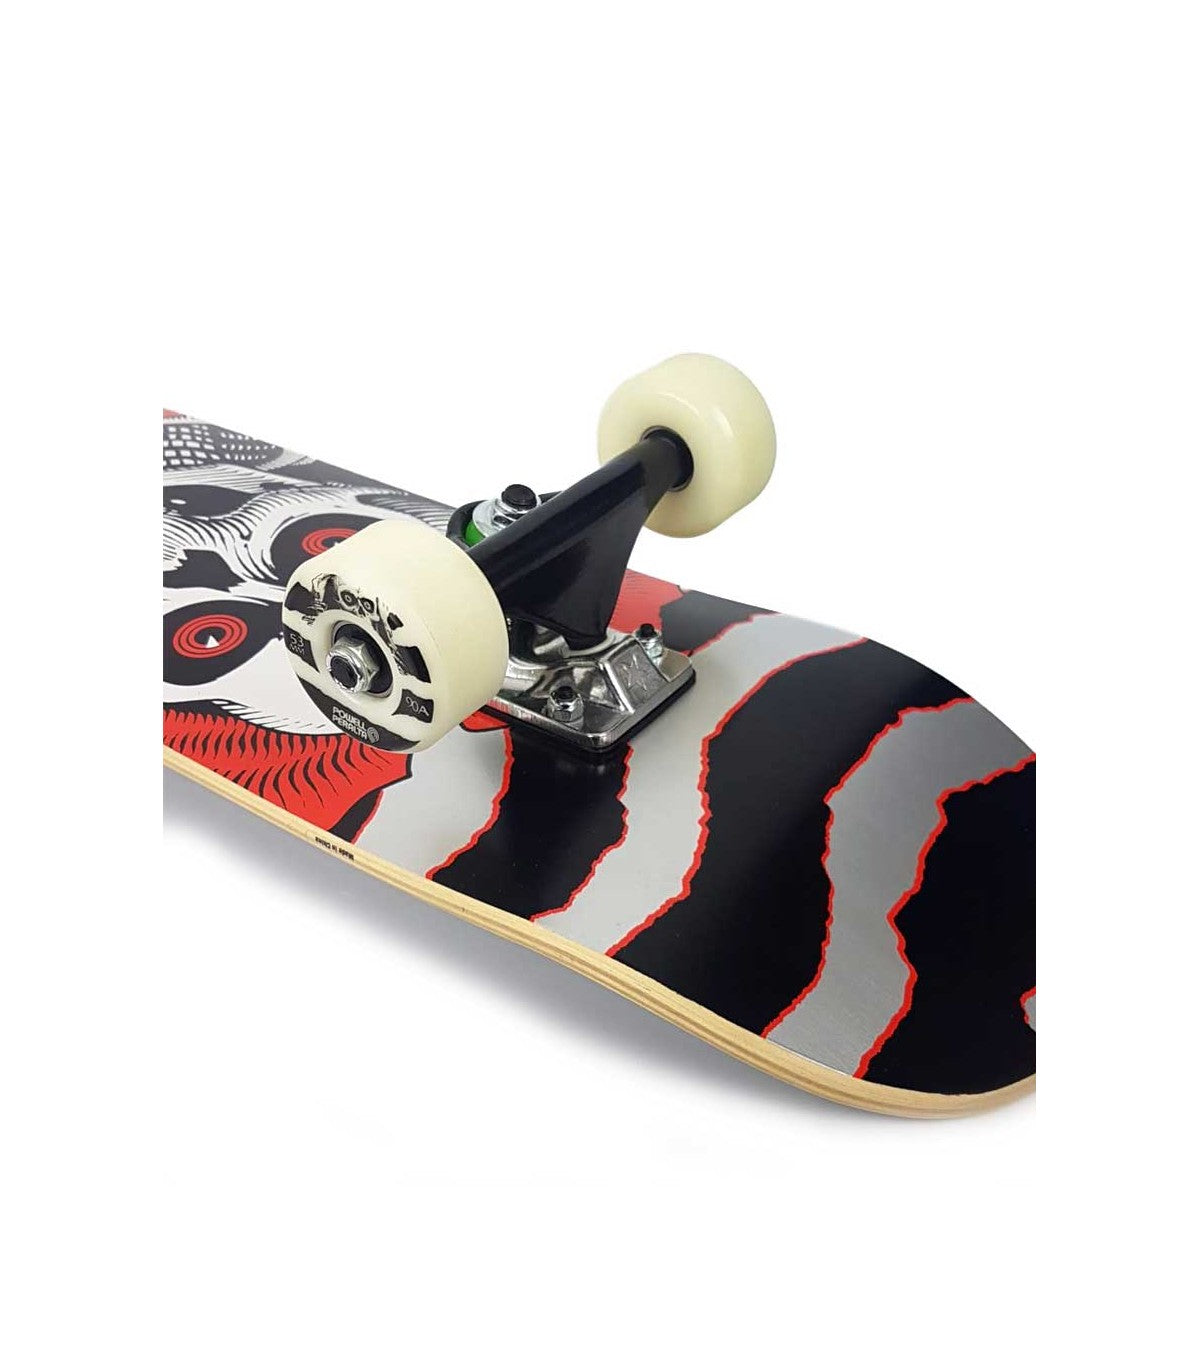 Skate Completo Powell Peralta Ripper One Off 7' Silver/Red